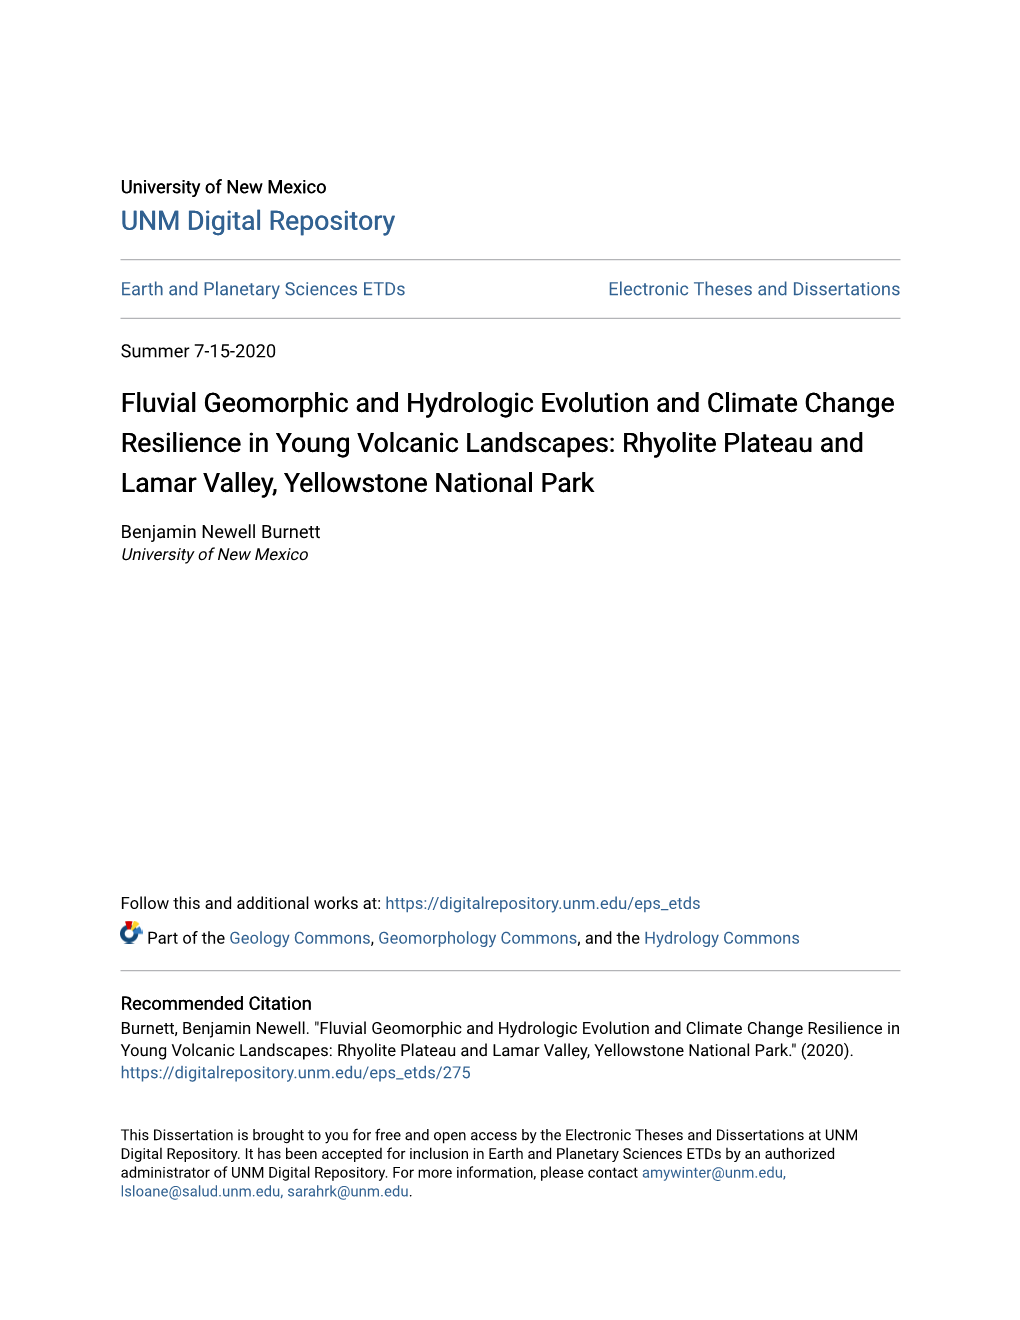 Fluvial Geomorphic and Hydrologic Evolution and Climate Change Resilience in Young Volcanic Landscapes: Rhyolite Plateau and Lamar Valley, Yellowstone National Park